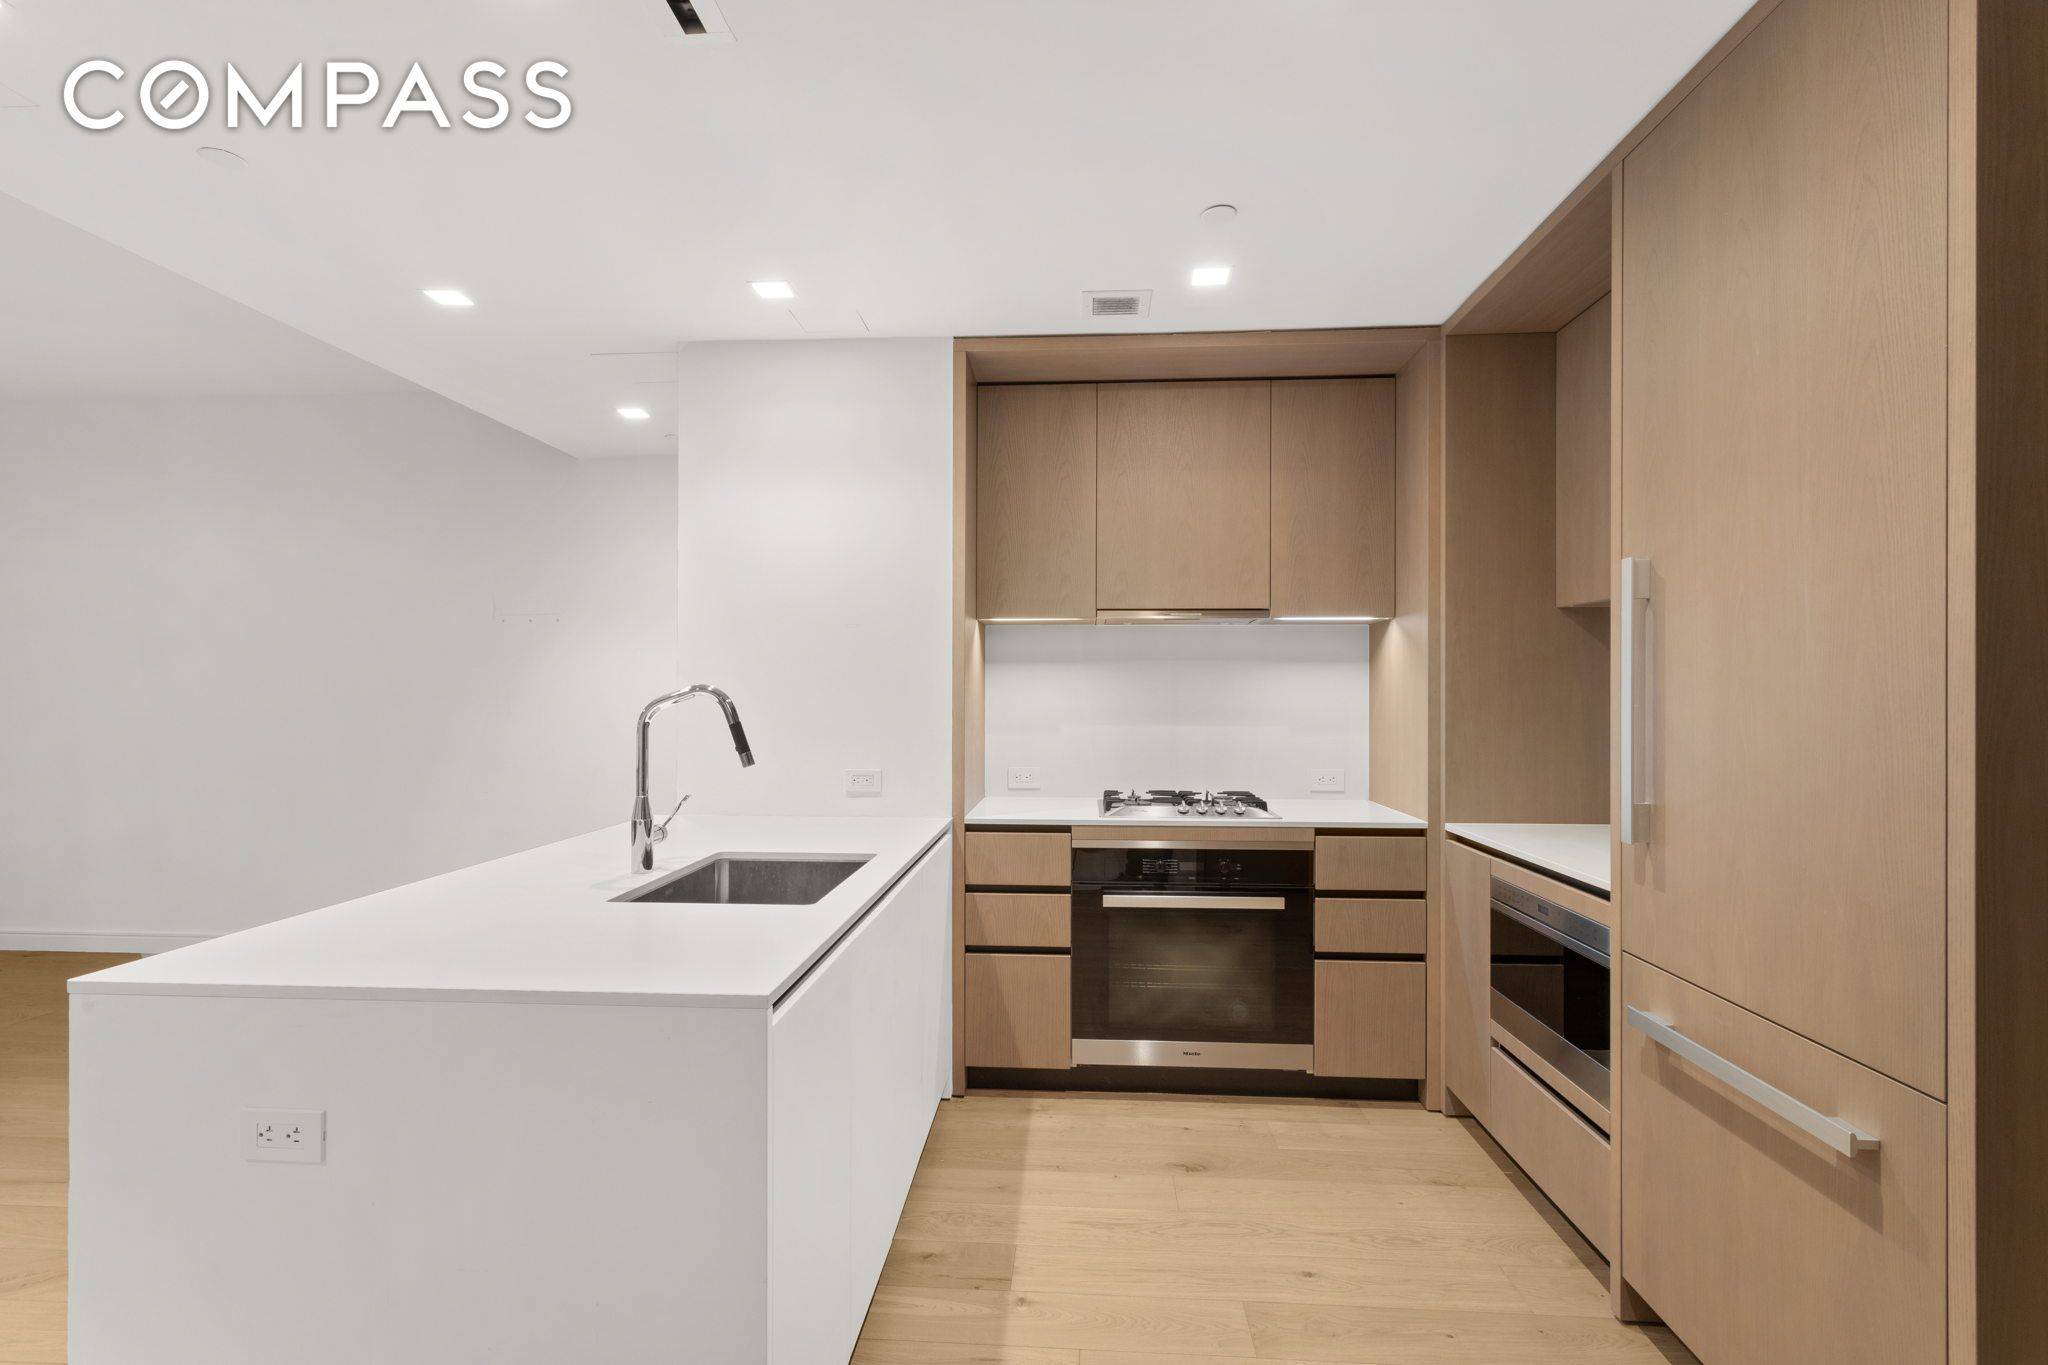 Welcome home to unit 7D of 200 East 21st St in Gramercy Park.